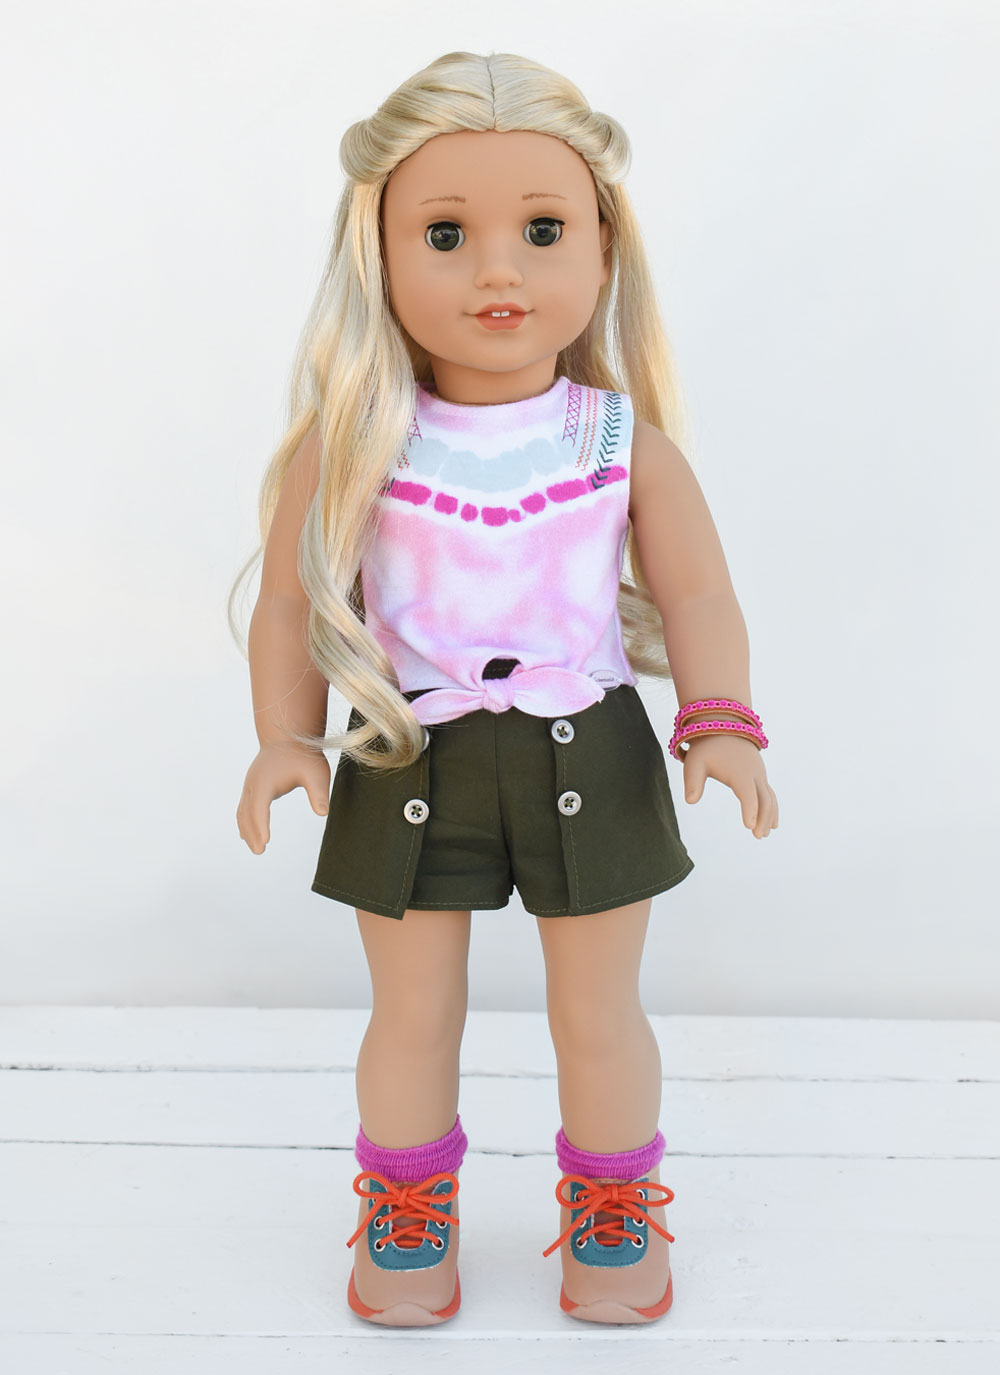 American Girl of the Year 2021 Kira Bailey doll and outfit 